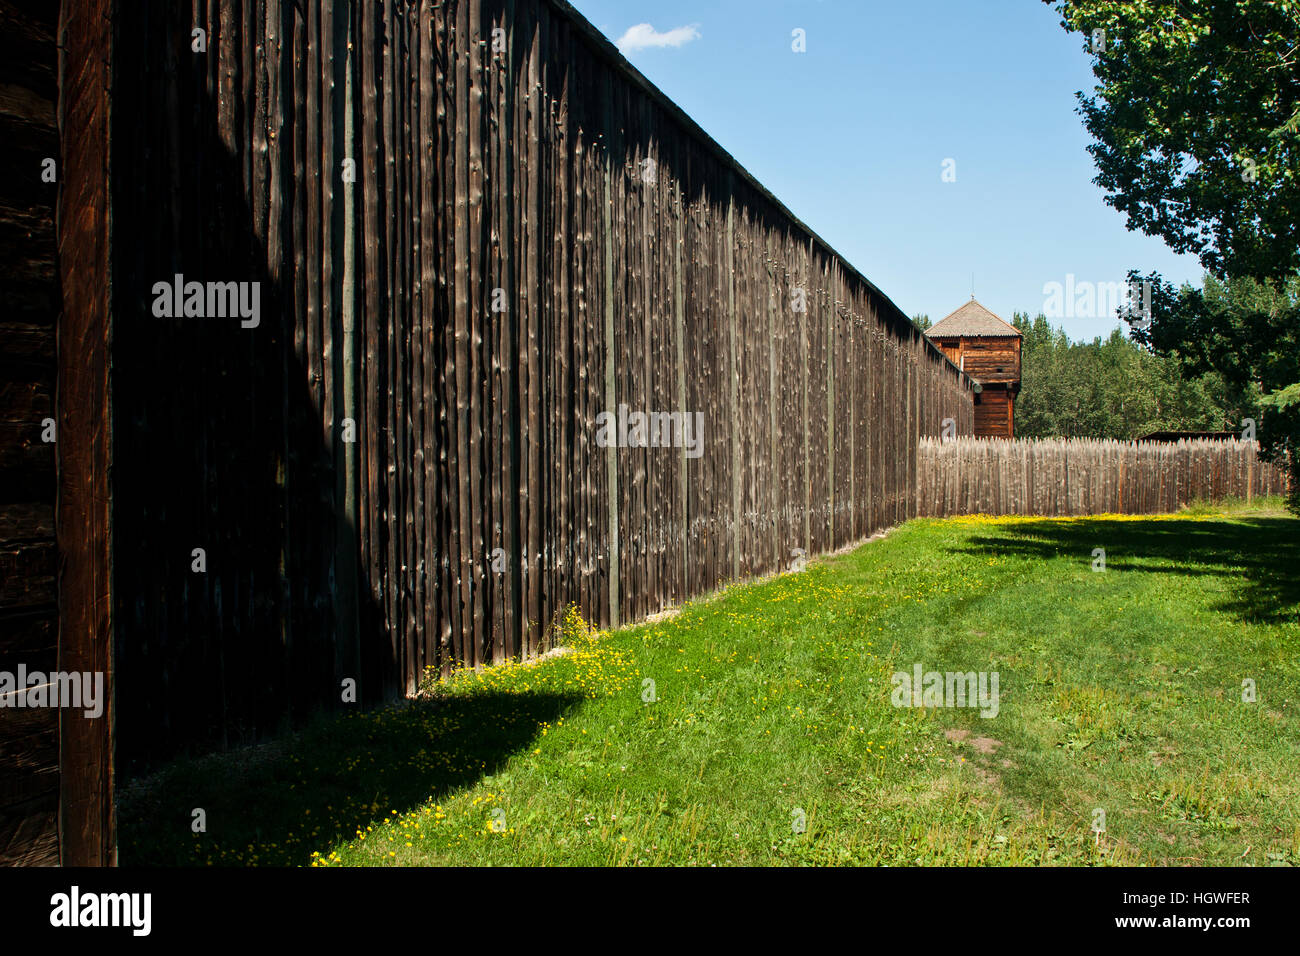 Fort Edmonton, Alberta, Canada, defensive stockade and tower nineteenth and early 20th century British fort that became Edmonton Stock Photo